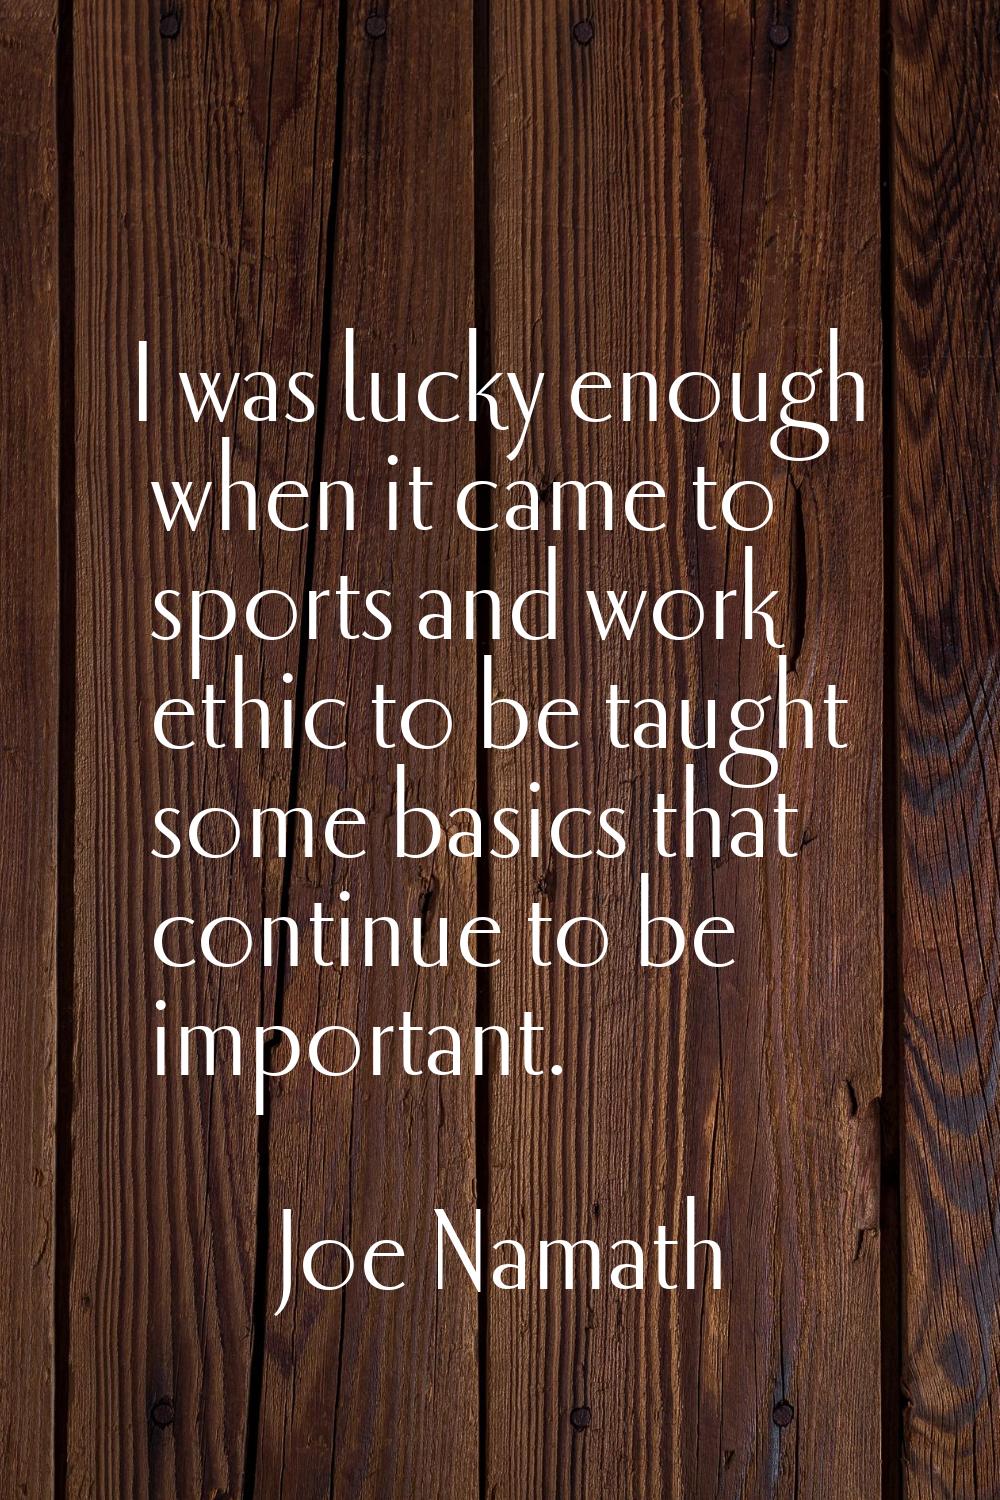 I was lucky enough when it came to sports and work ethic to be taught some basics that continue to 